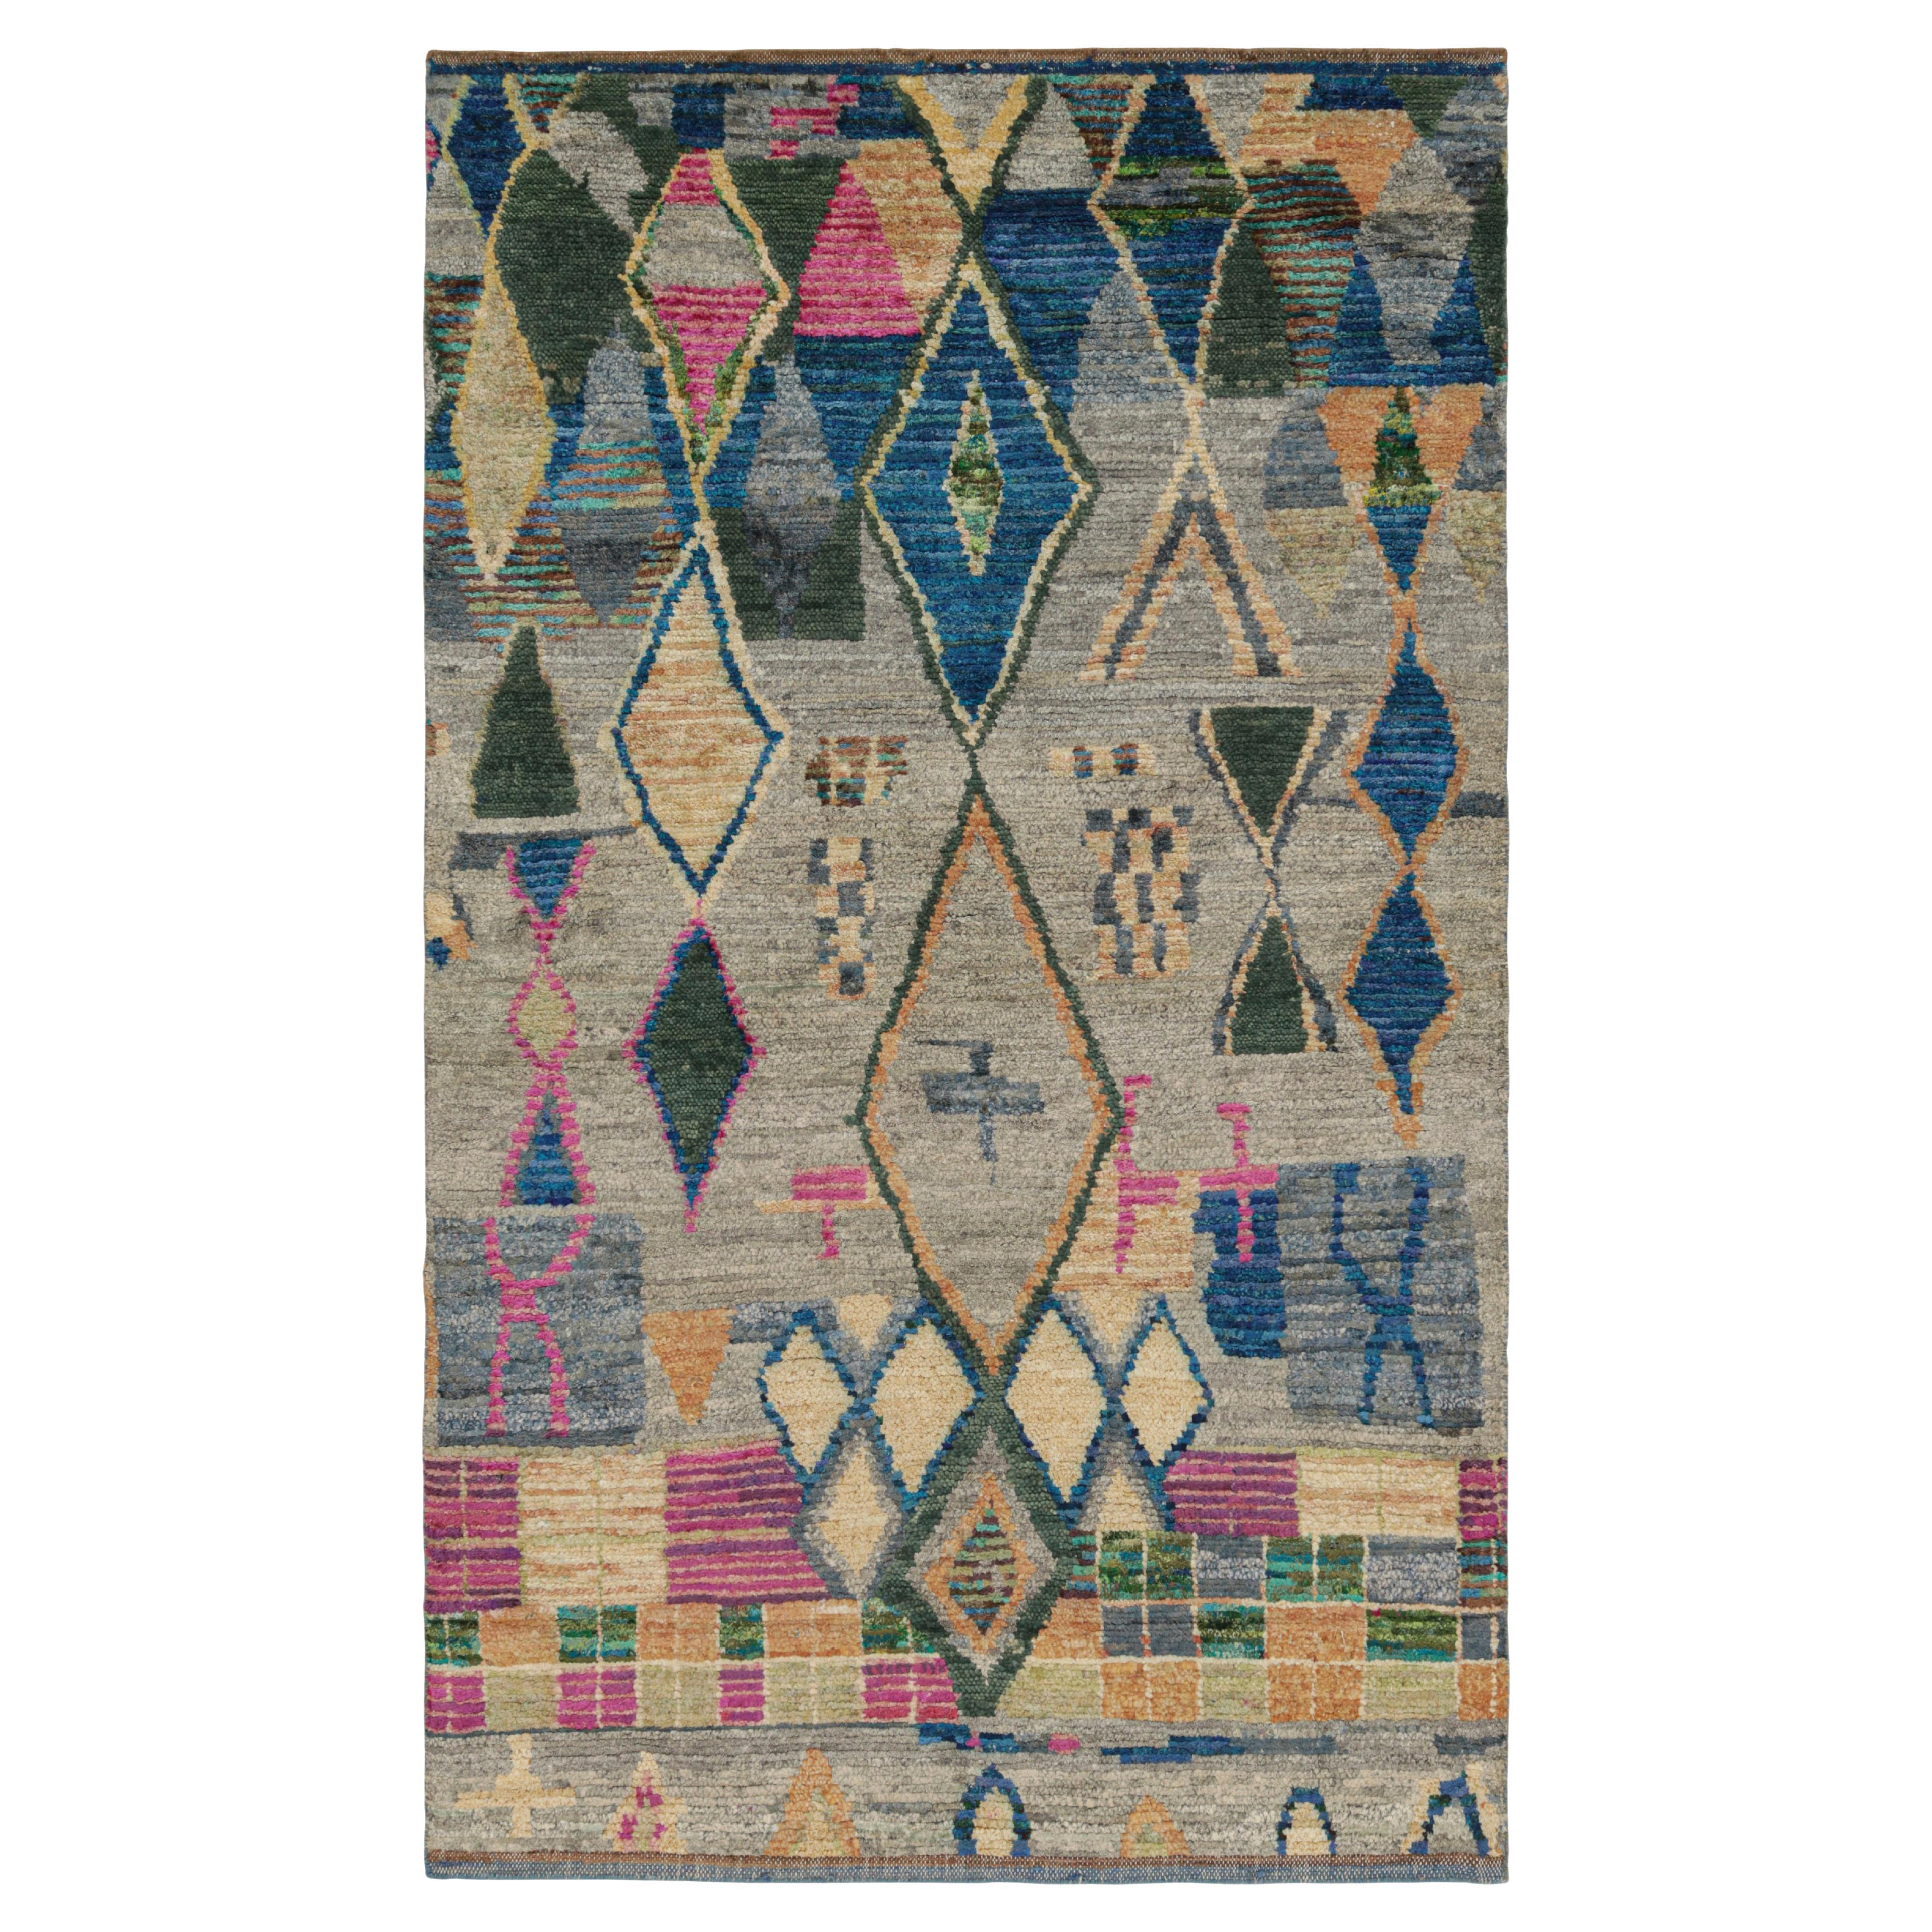 Rug & Kilim’s Contemporary Moroccan Style Rug Polychromatic Geometric Patterns For Sale